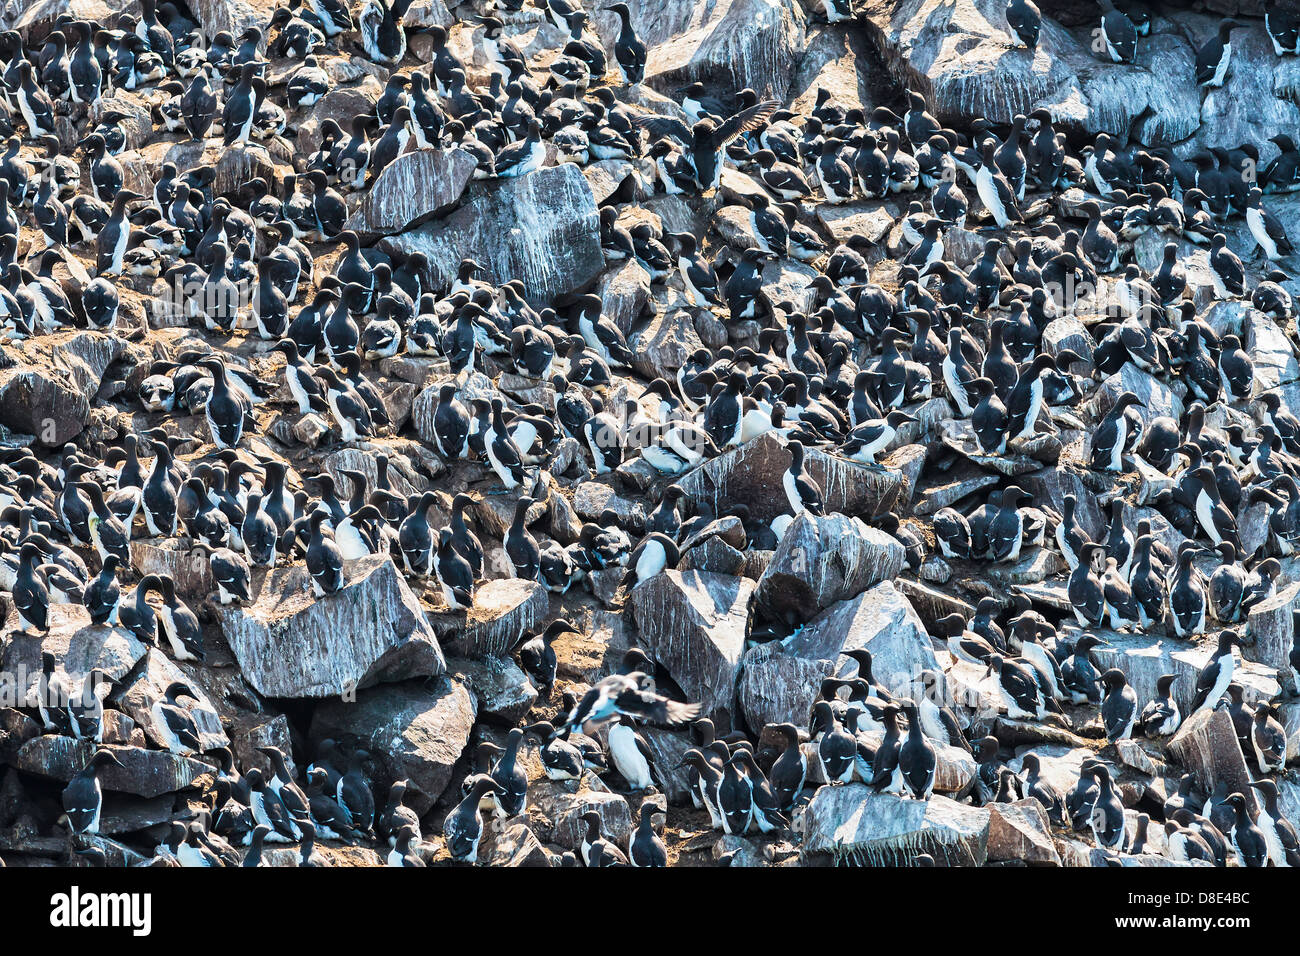 Massive Concentration of Murres or Gillemots on a cliff Stock Photo